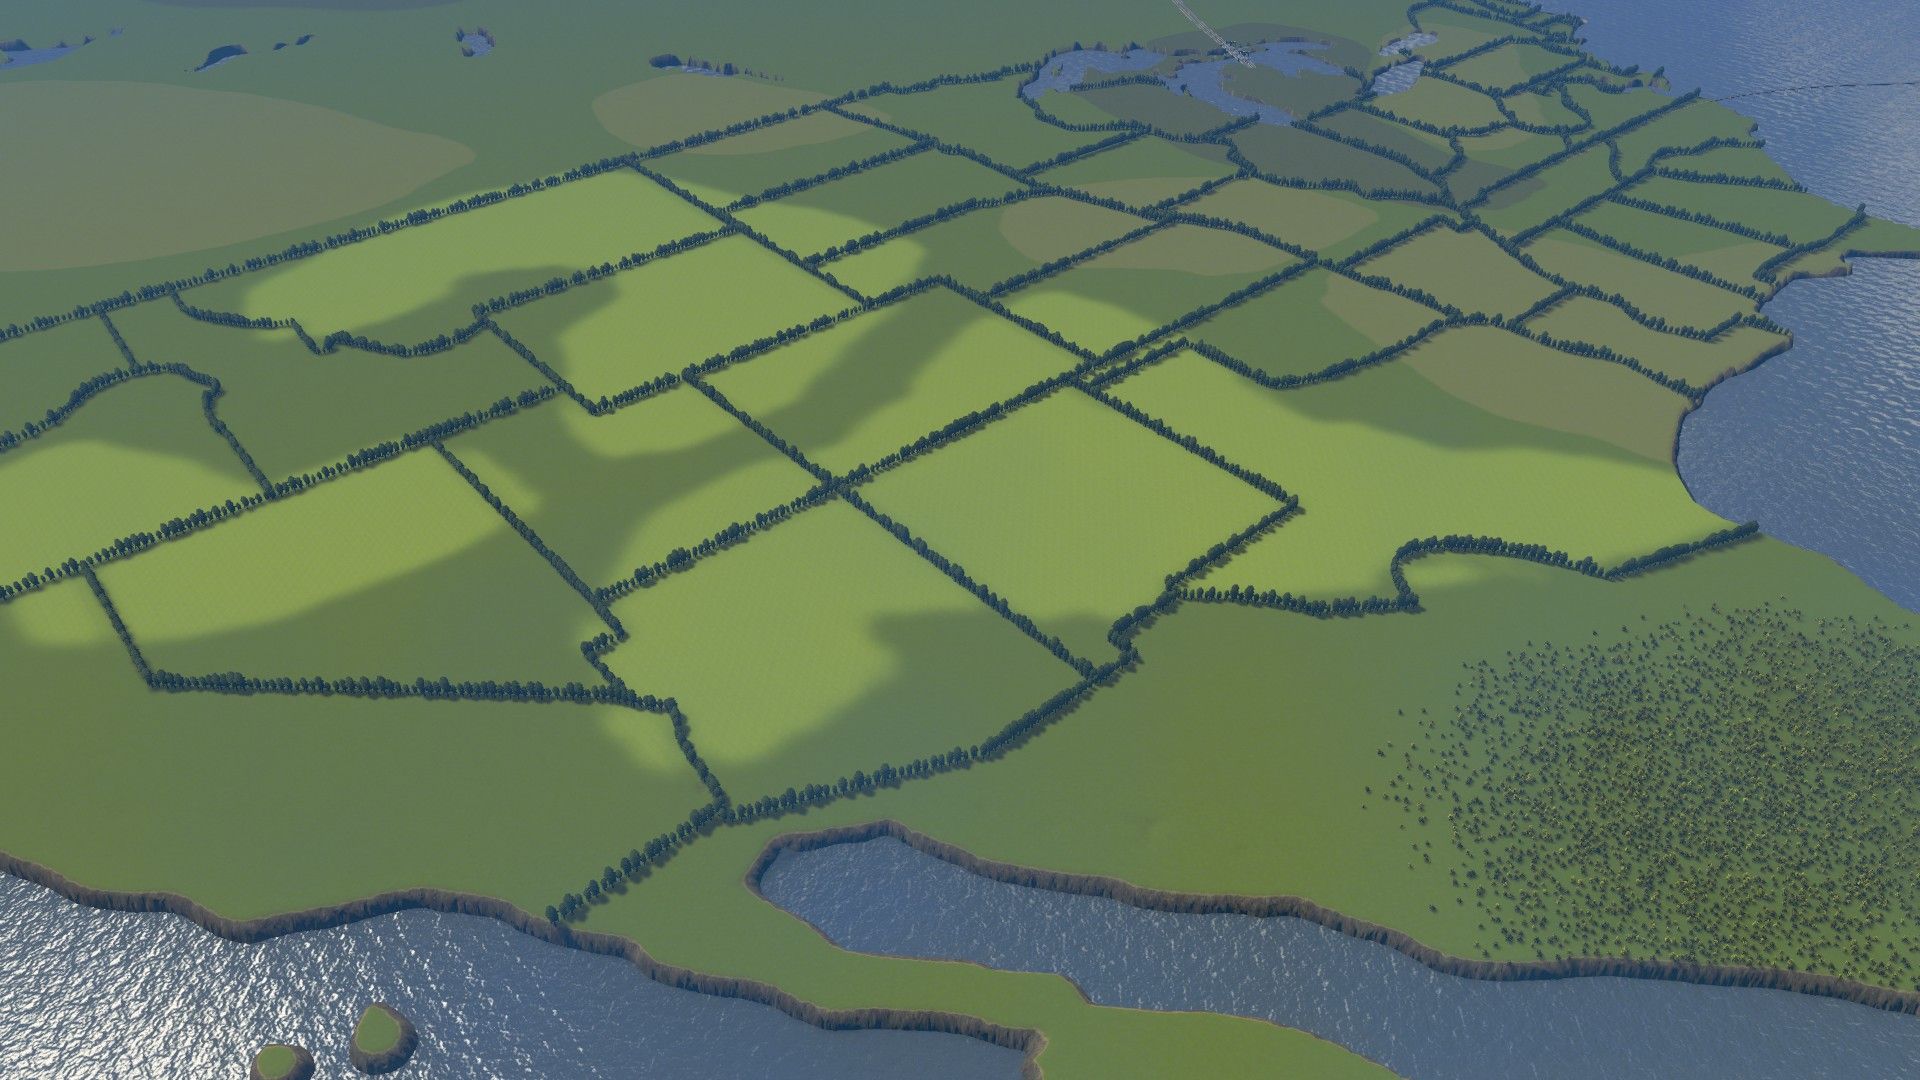 Brink Væk grus Cities Skylines: Creating the Map "USA"